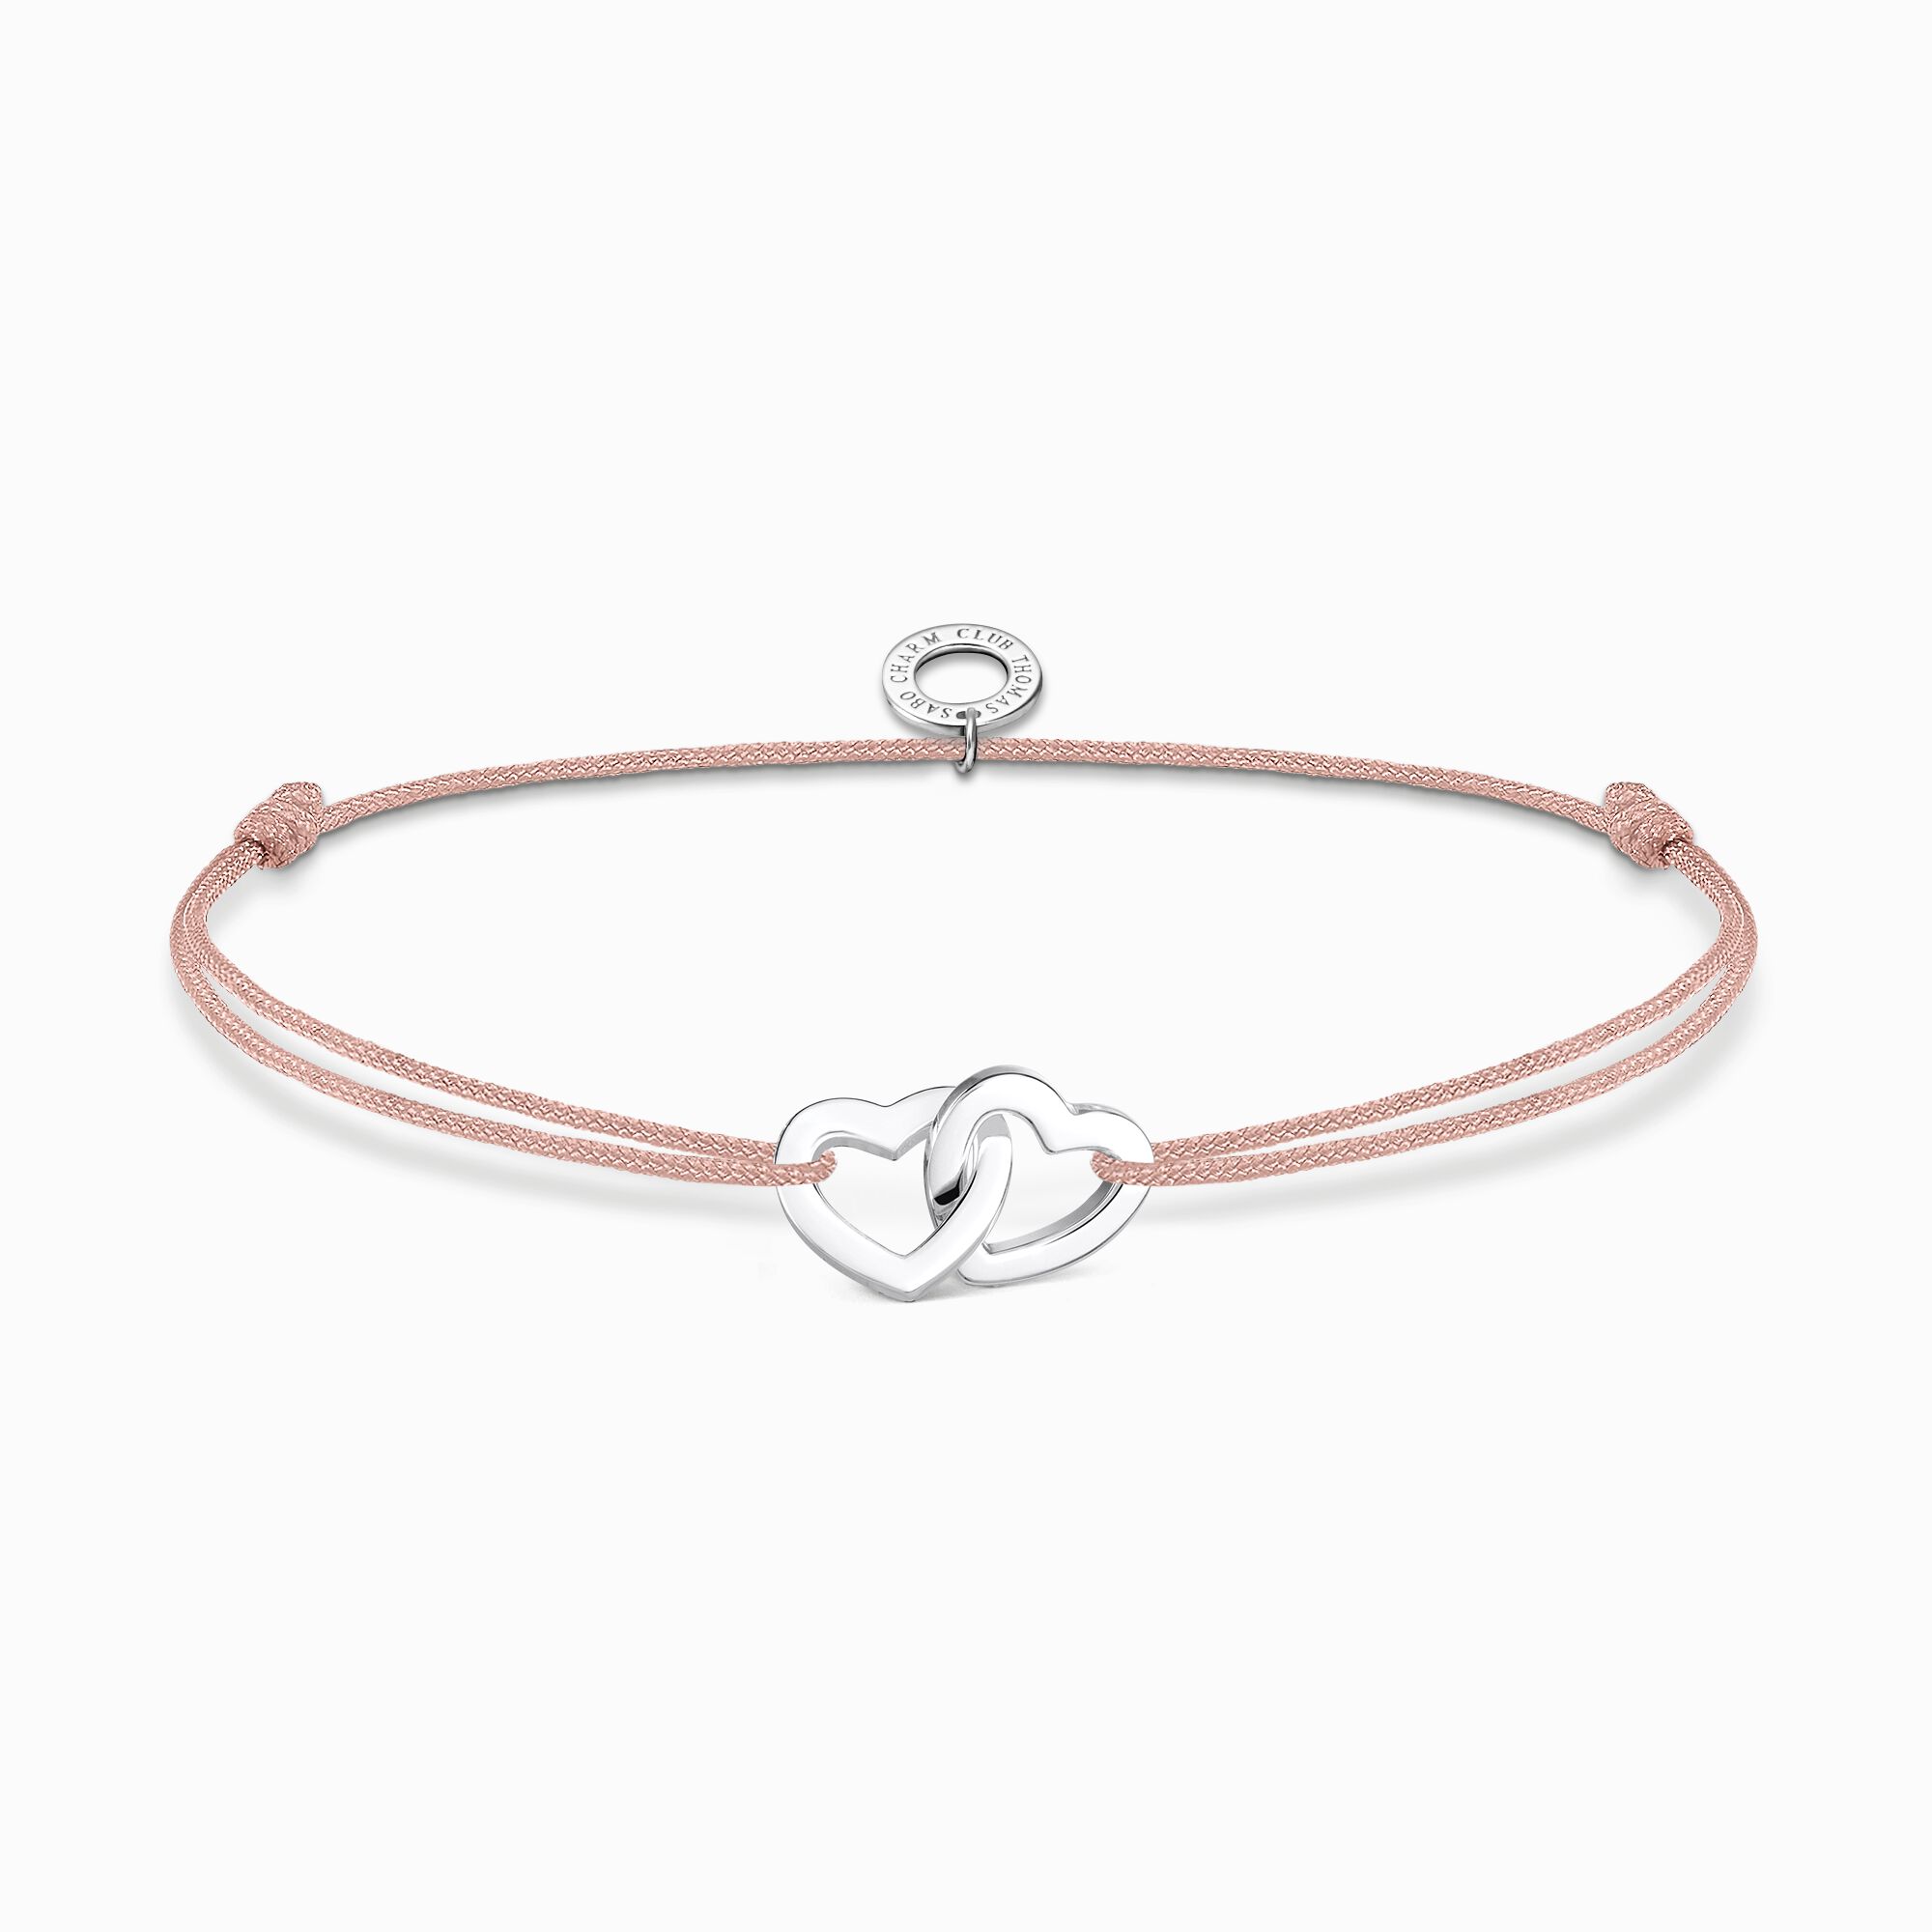 Bracelet Little Secret hearts from the Charming Collection collection in the THOMAS SABO online store